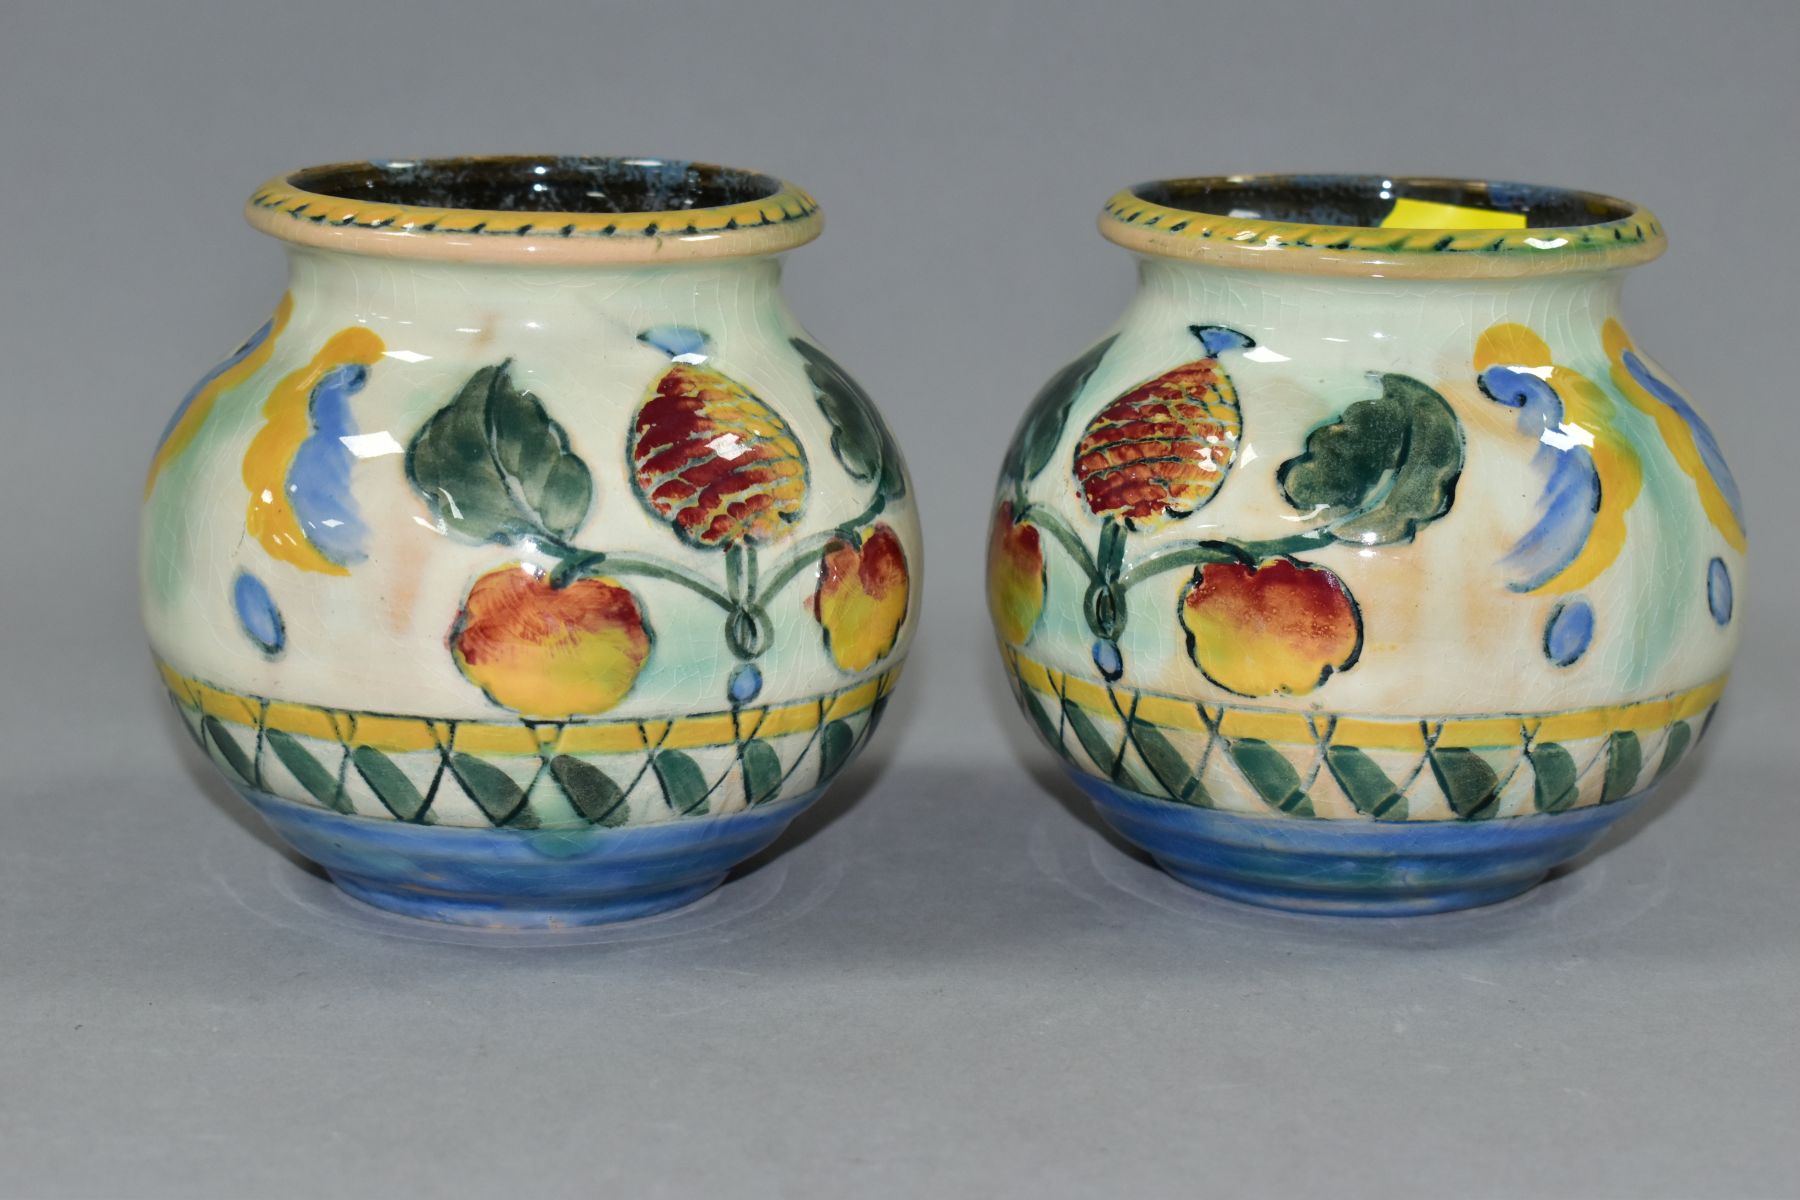 TWO ROYAL DOULTON BRANGWYN WARE VASES D5079, hand painted decoration, transfer printed back - Image 3 of 5